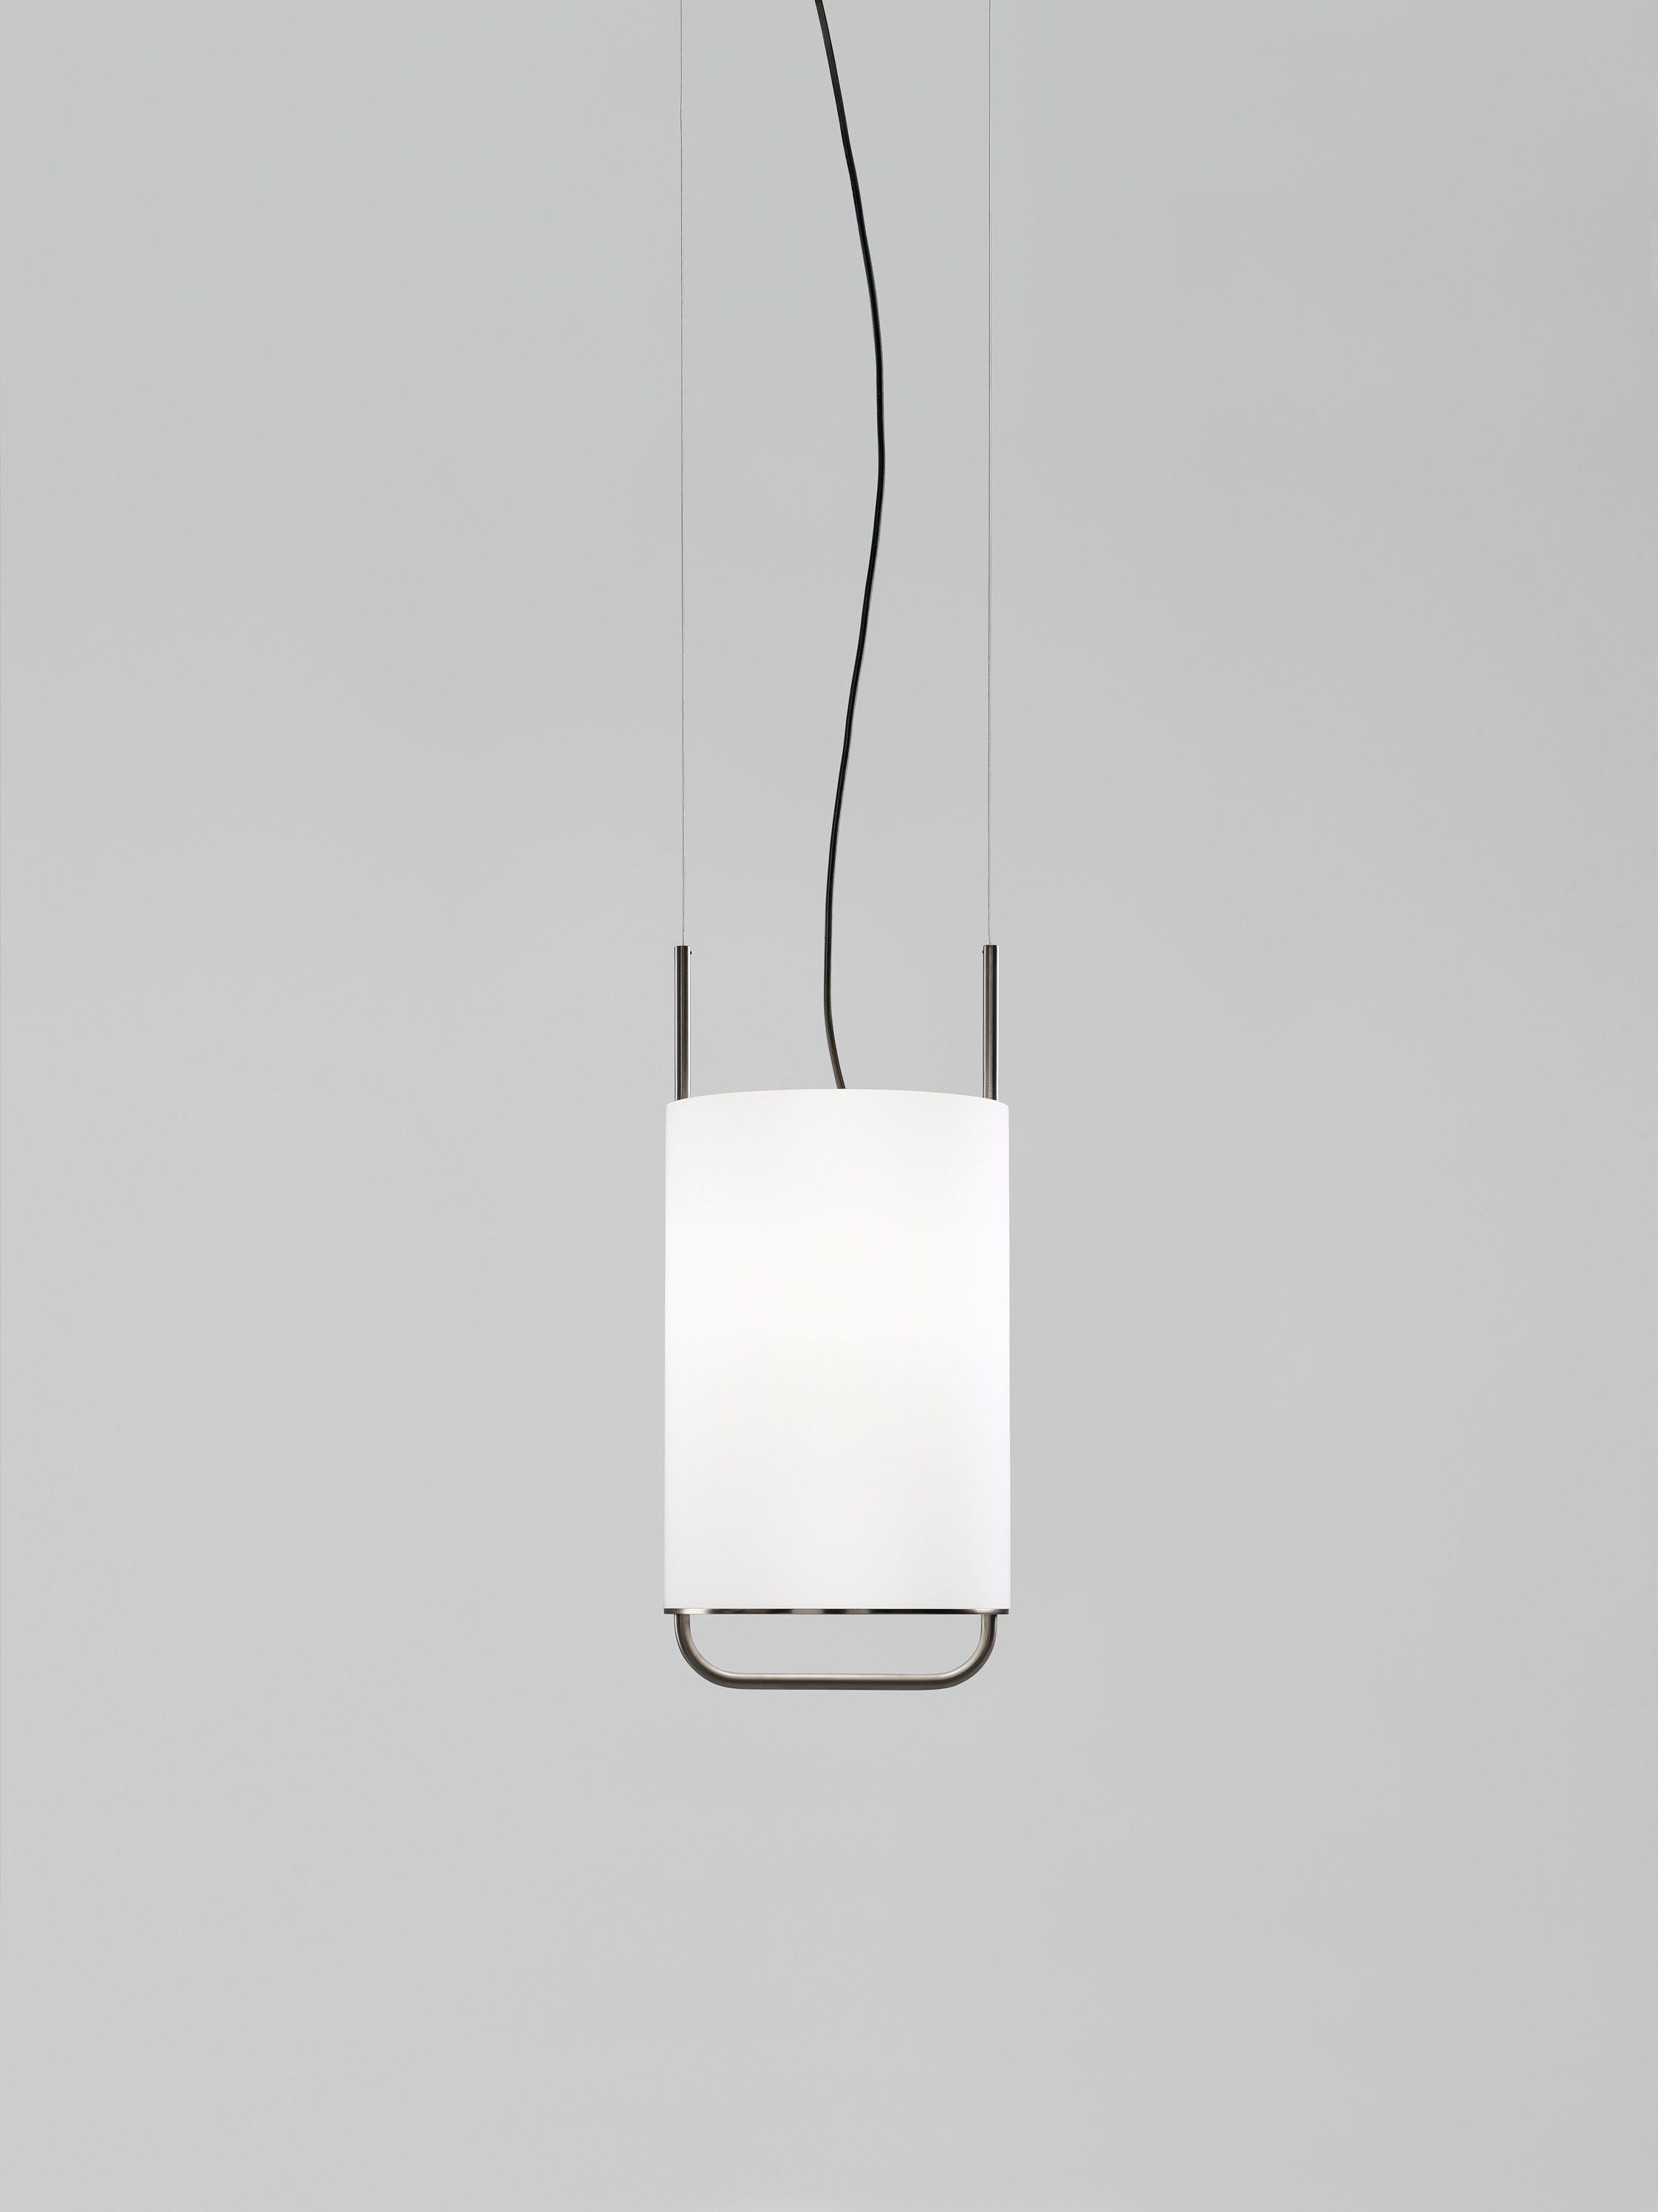 Alistair T
Suspension lamp, model Alistair T, designed by Jordi Vaciana in 2013.
Manufactured by Parachilna.
Structured in golden or graphite matt electroplated steel. Cylindrical diffuser in blown opal matt glass. 
Canopy in white matt lacquered